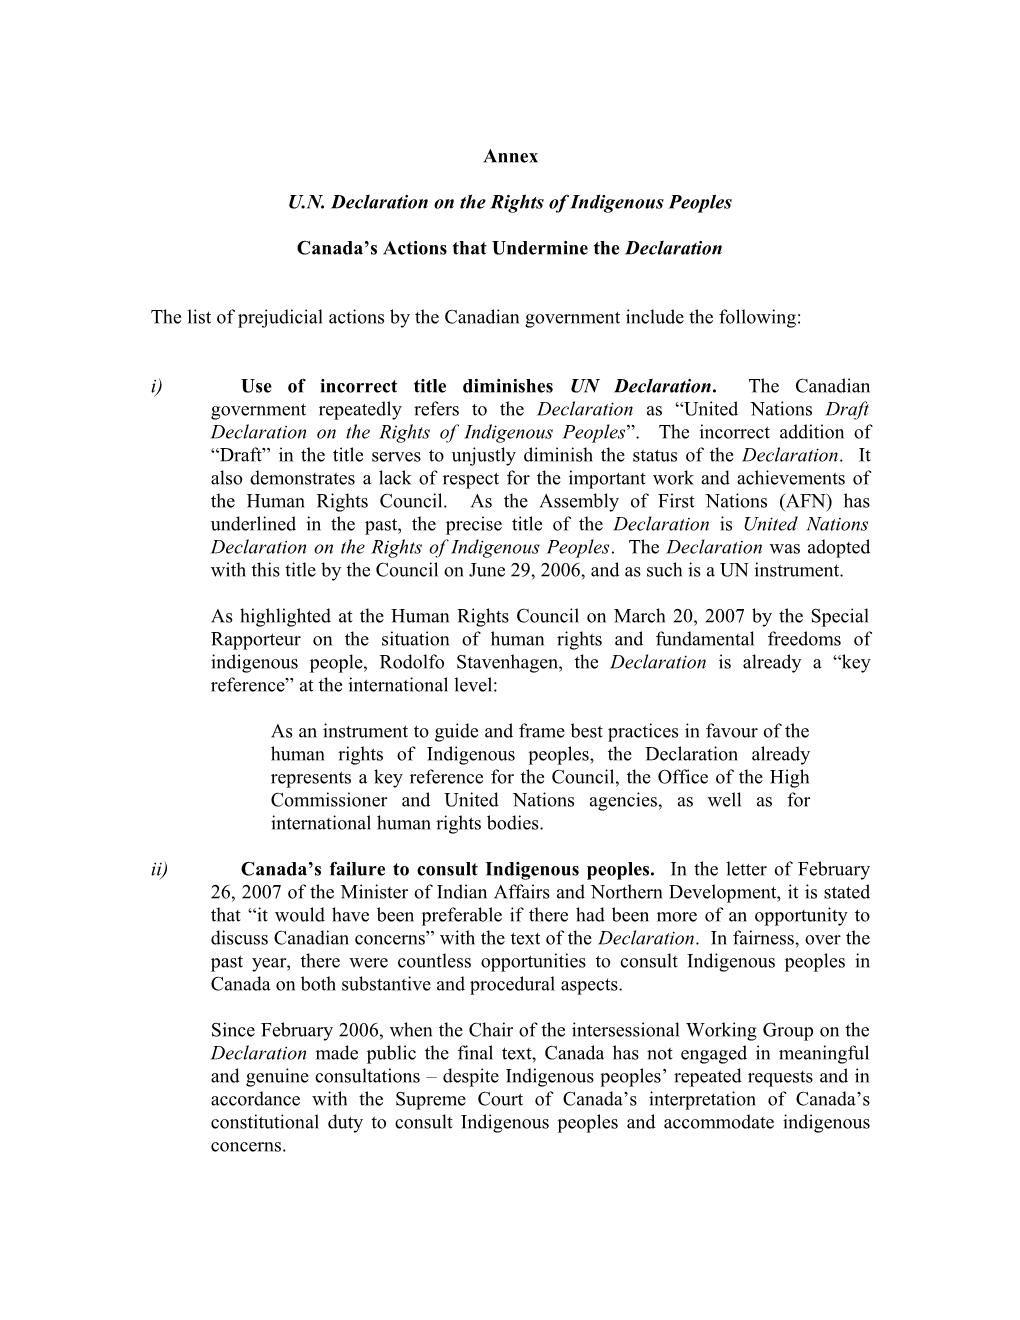 U.N. Declaration on the Rights of Indigenous Peoples